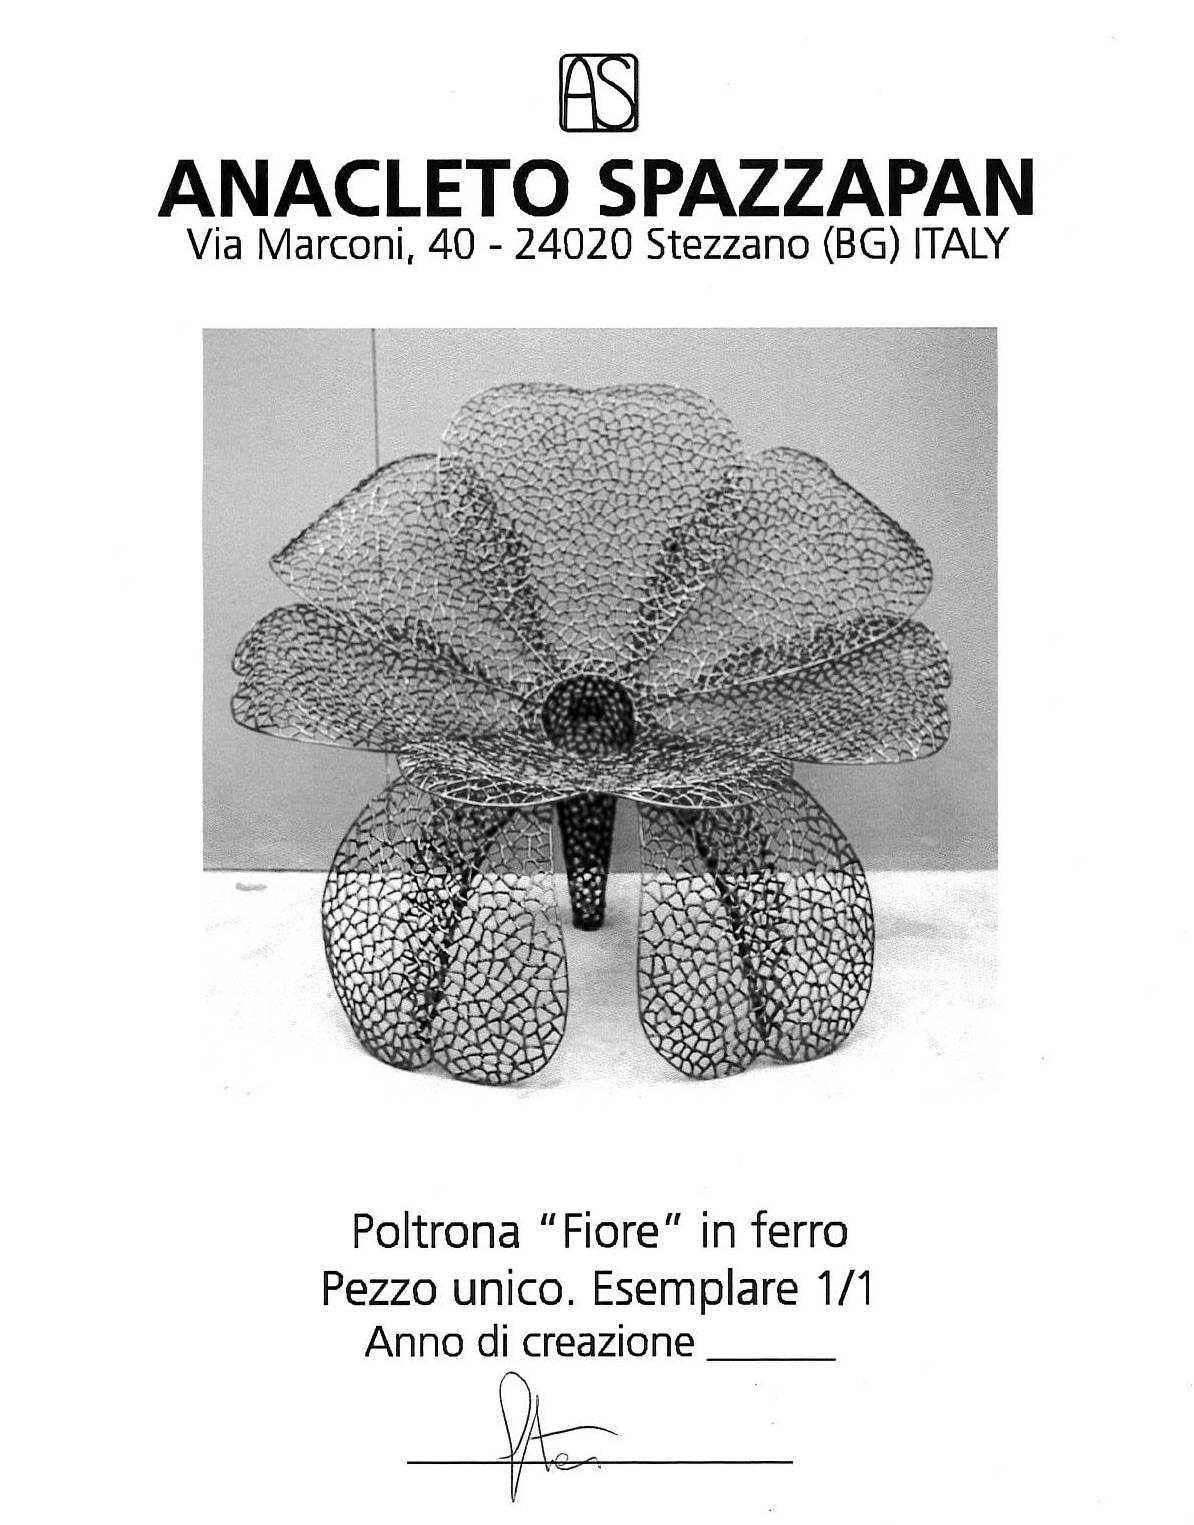 Modern metal flower armchair 
by Anacleto Spazzapan, 
Italy 2009.
single edition, number 1 / 1 
hand welded (one month of work)
certificate of artist authenticity.

A multifaceted artist, Anacleto Spazzapan was born in Luino, Italy in 1943